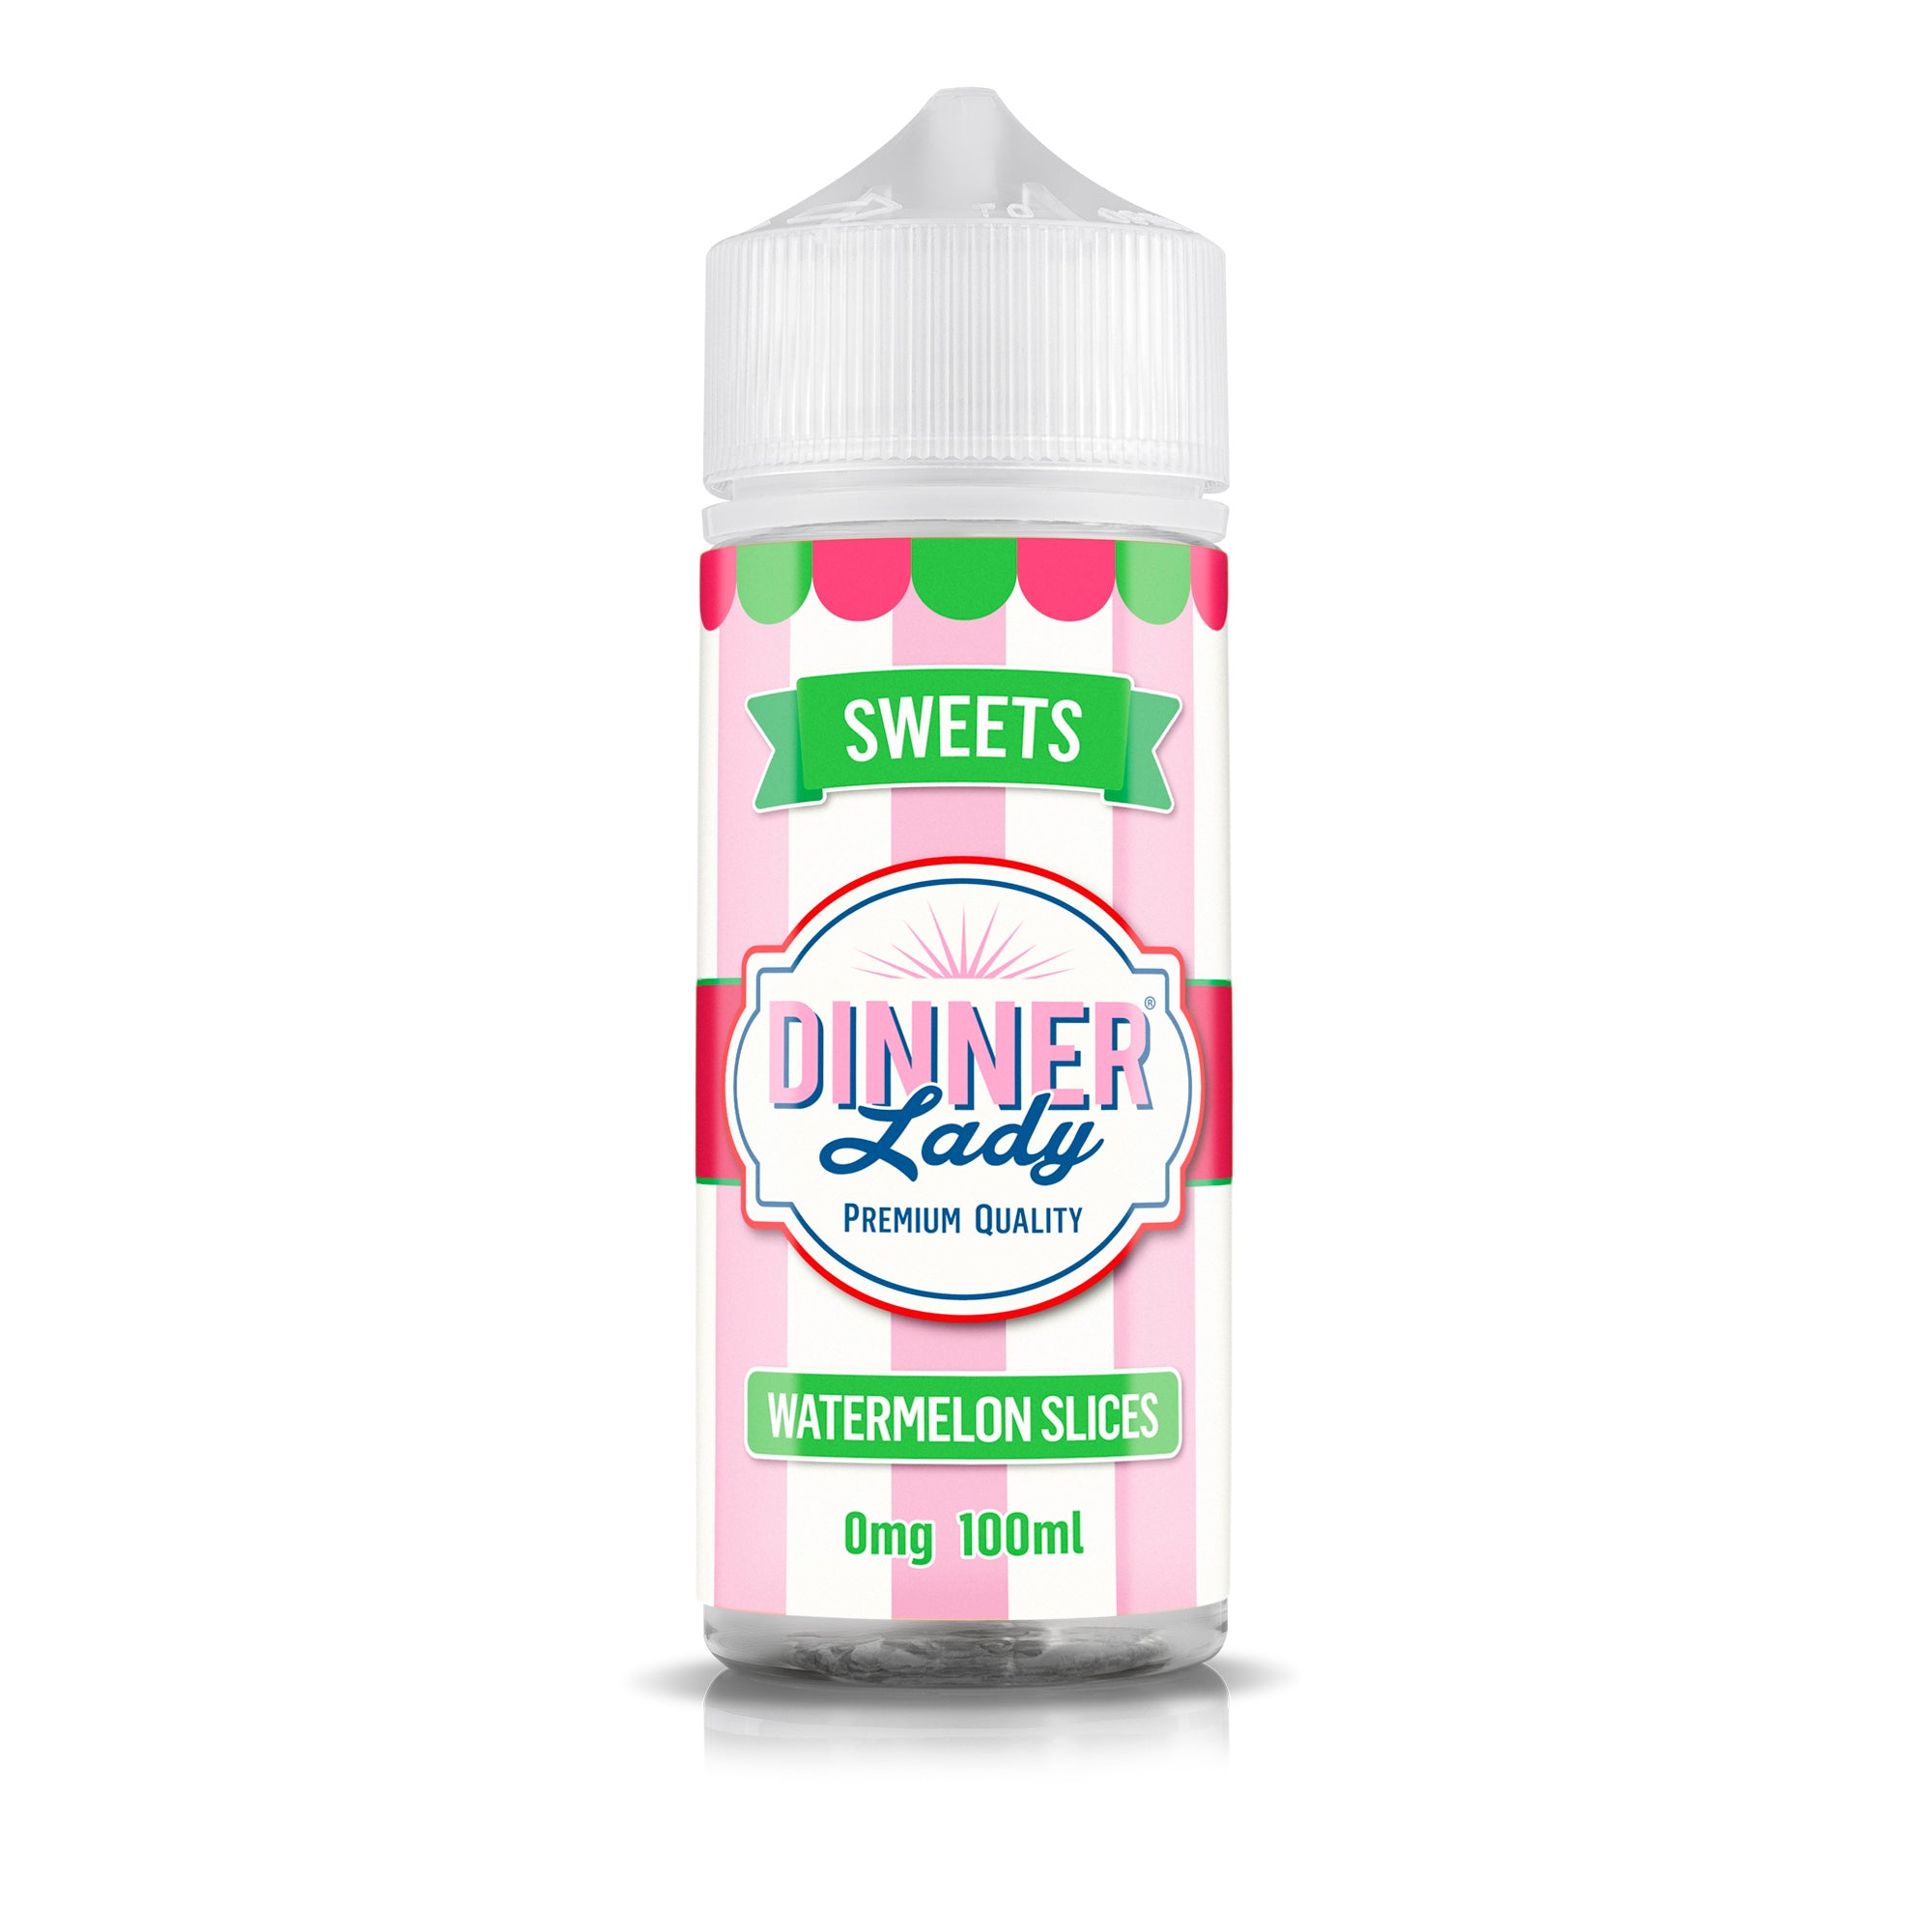 Dinner Lady | 100ml | Sweets | Watermelon Slices | Wholesale